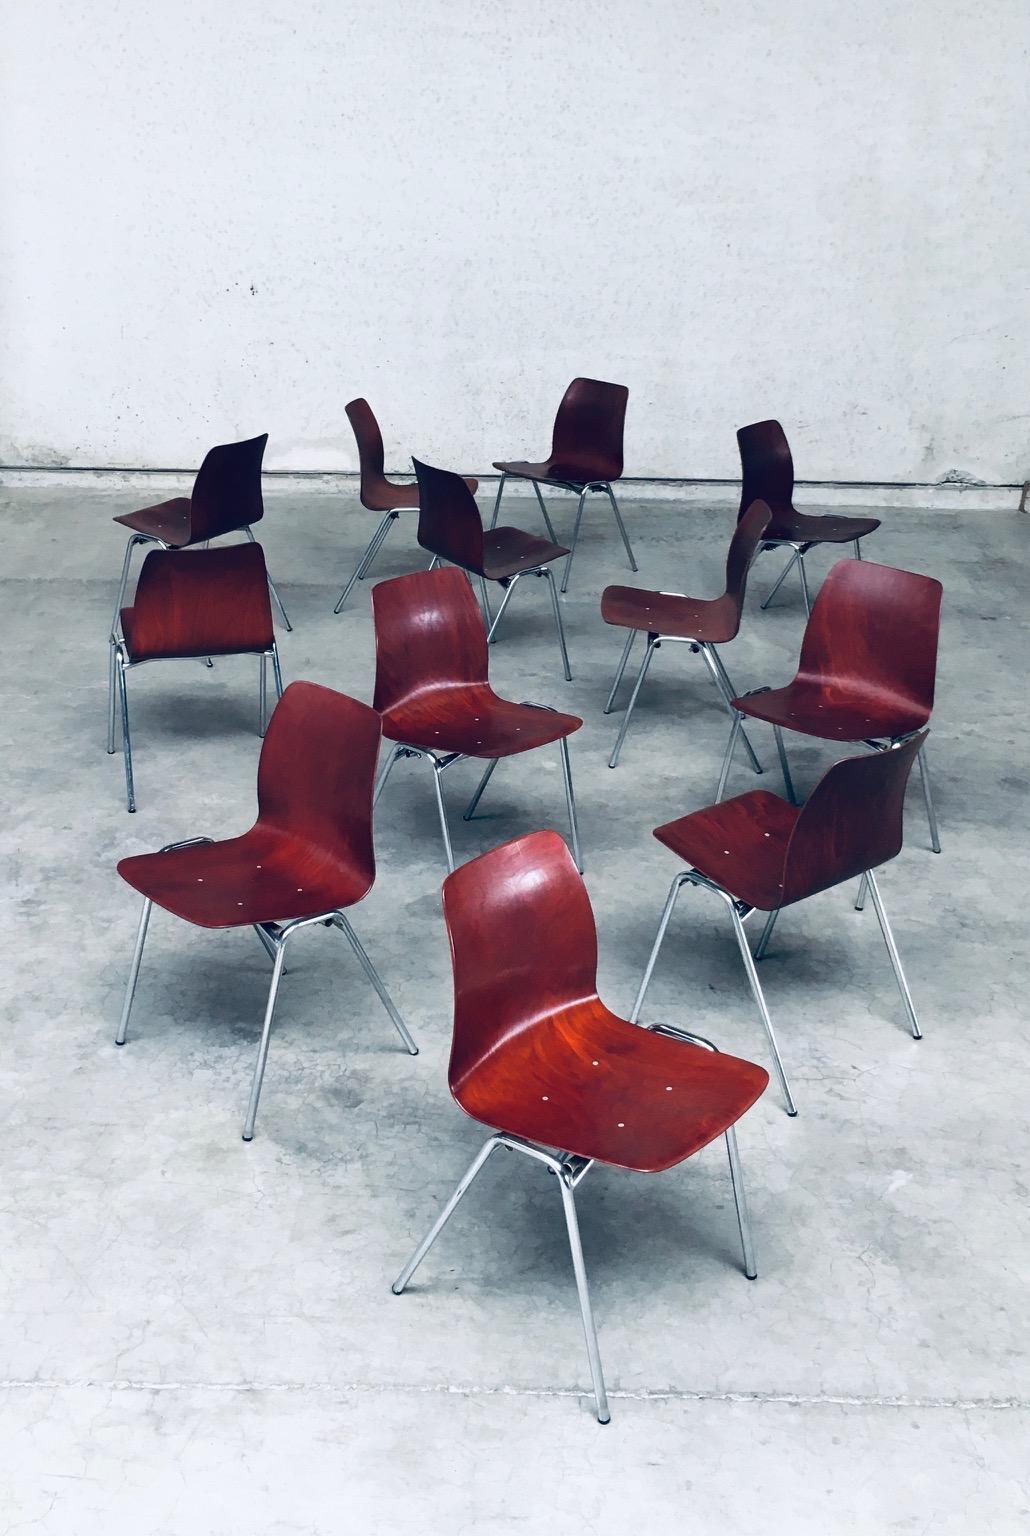 Mid-20th Century Midcentury Design Stacking Chairs by Elmar Flötotto for Pagholz, 1960's Germany For Sale